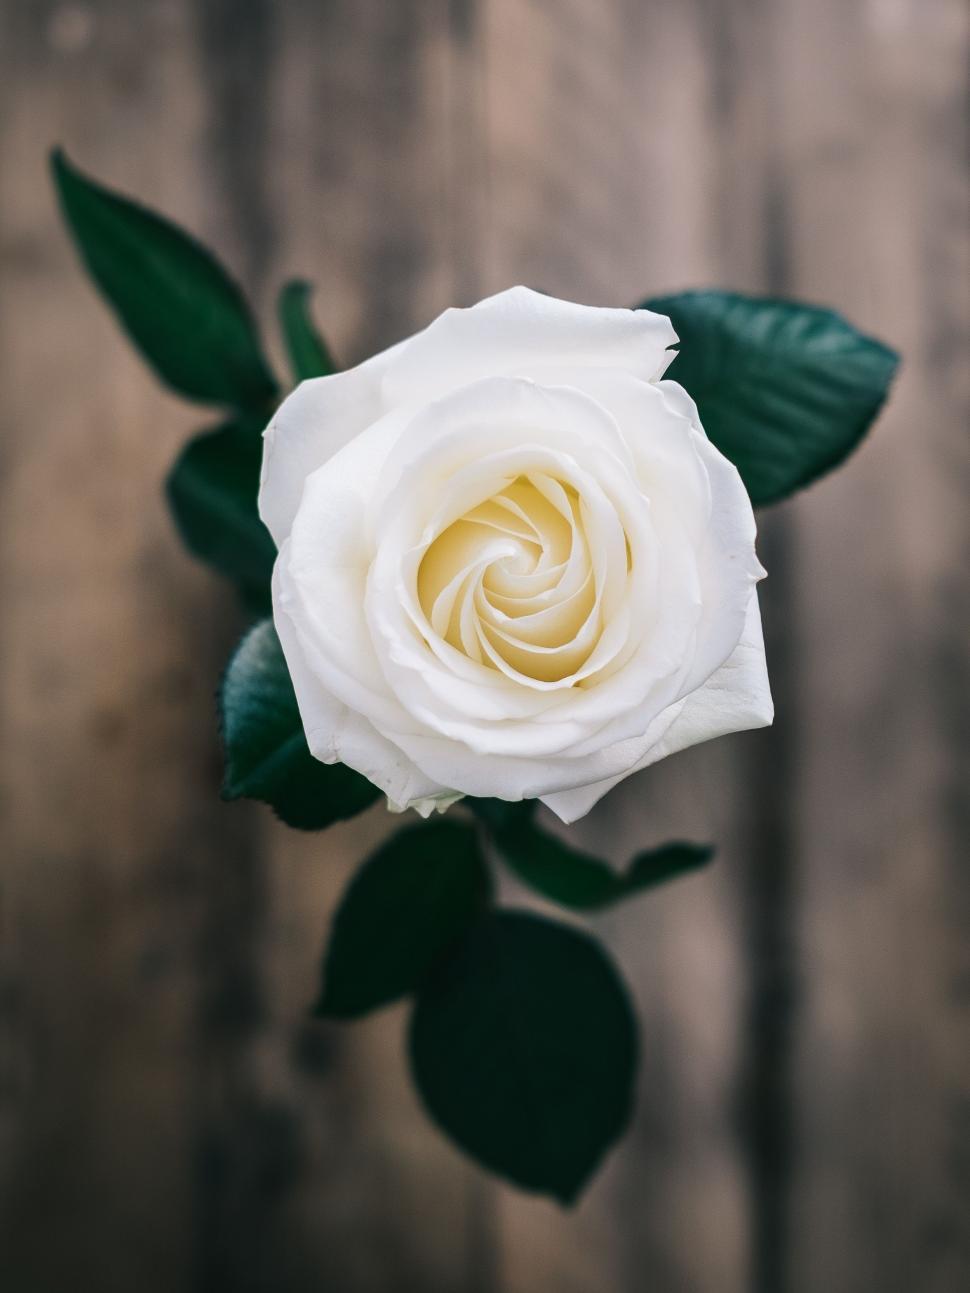 Free Image of White Rose With Green Leaves on Wooden Background 